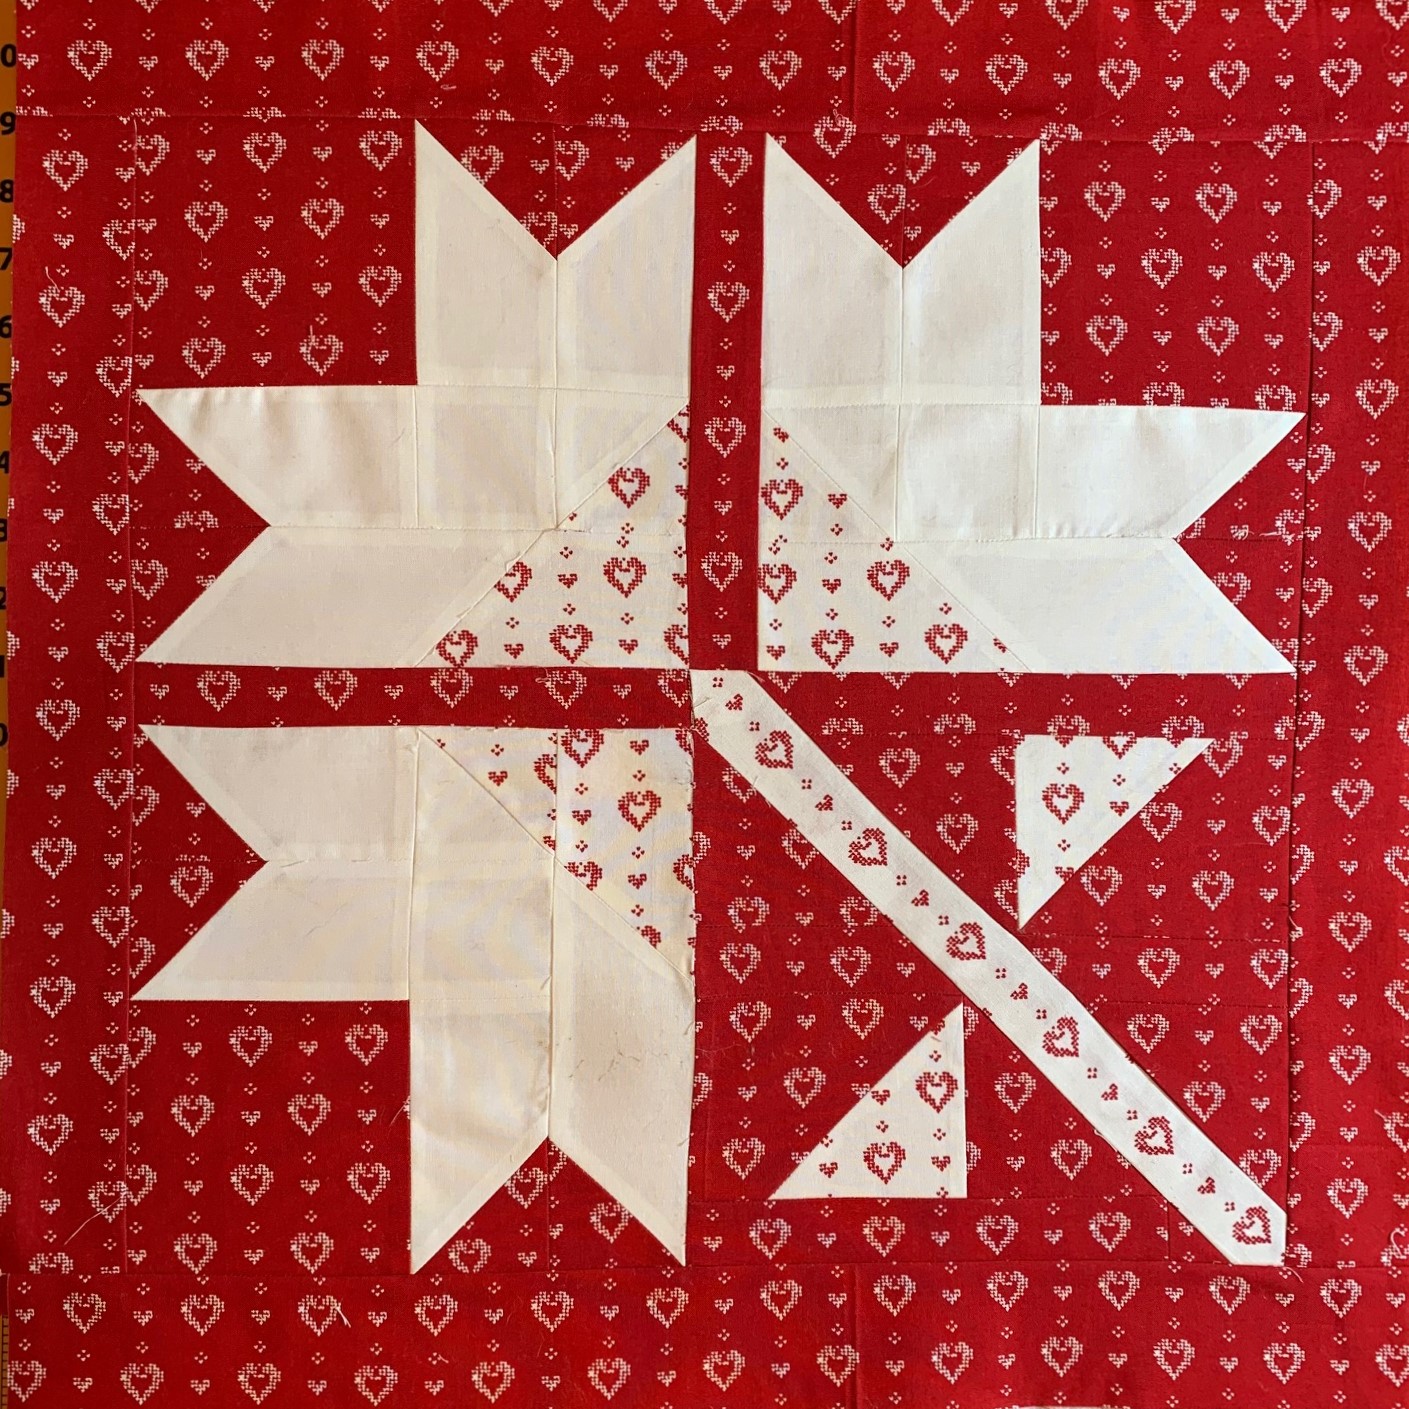 Cutting Fabric for Quilt Blocks with the Cricut Maker - Diary of a Quilter  - a quilt blog